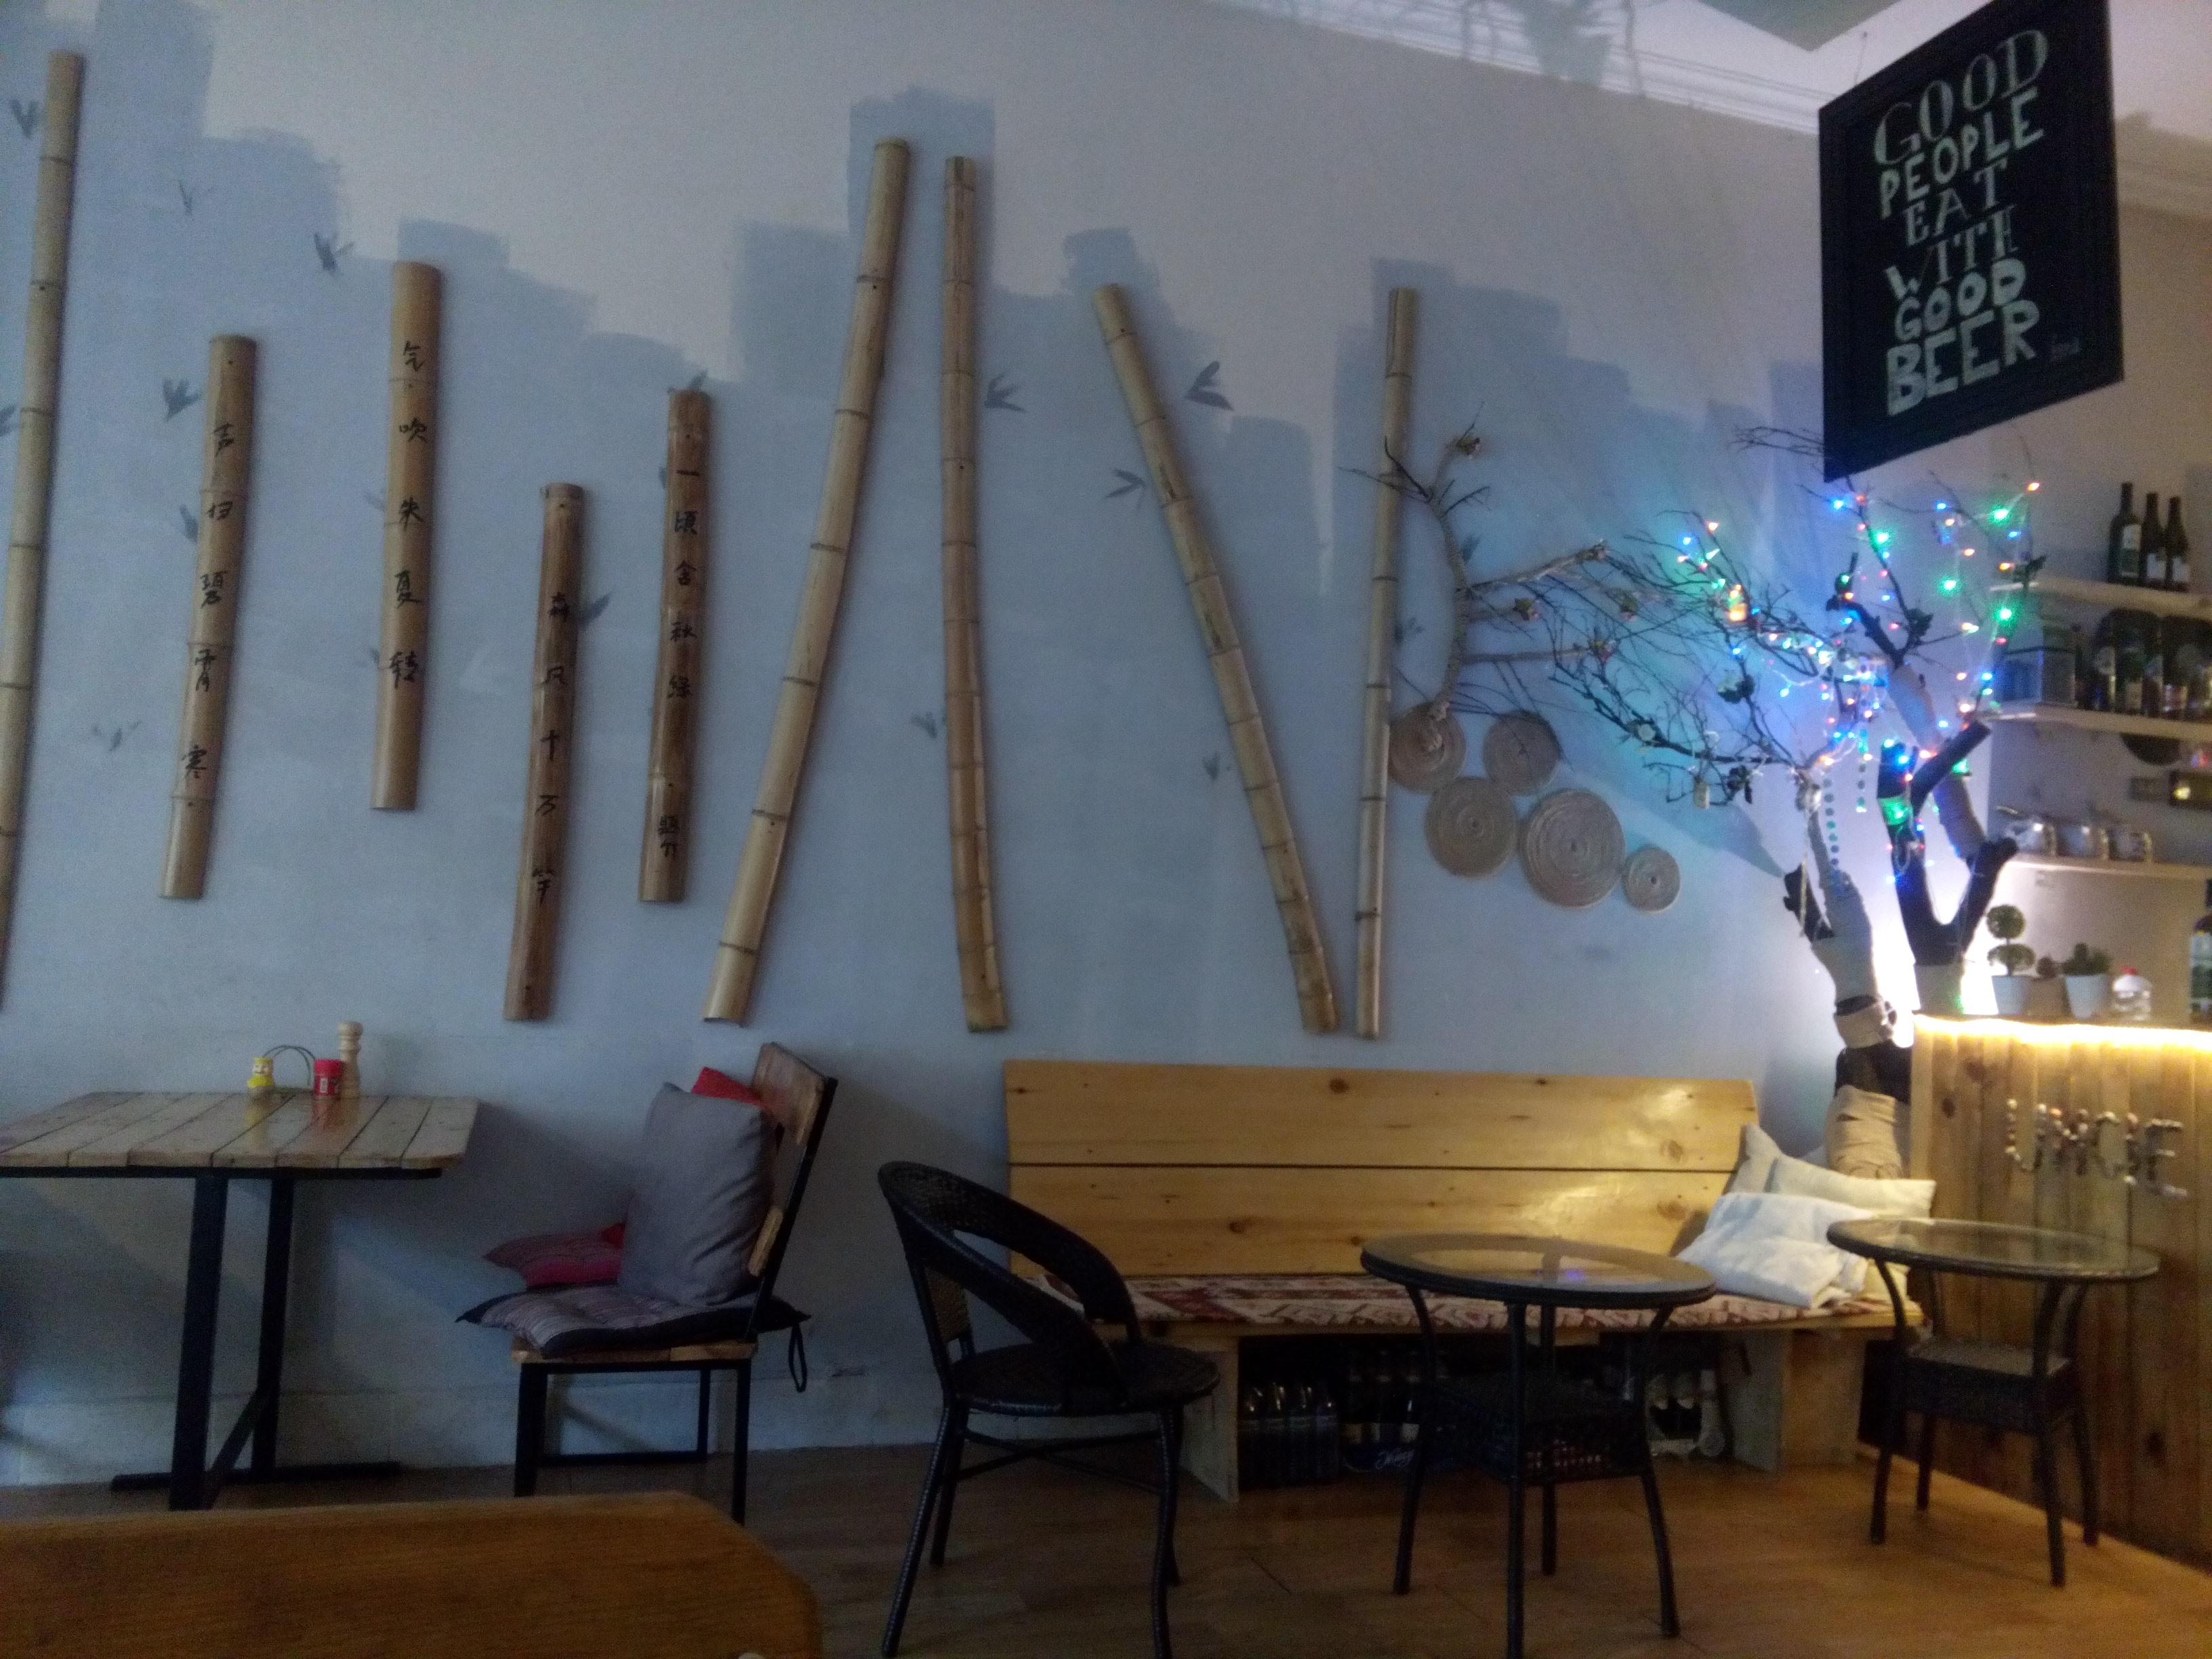 A restaurant interior, lots of bamboo decorating a blue wall, with wooden tables and chairs